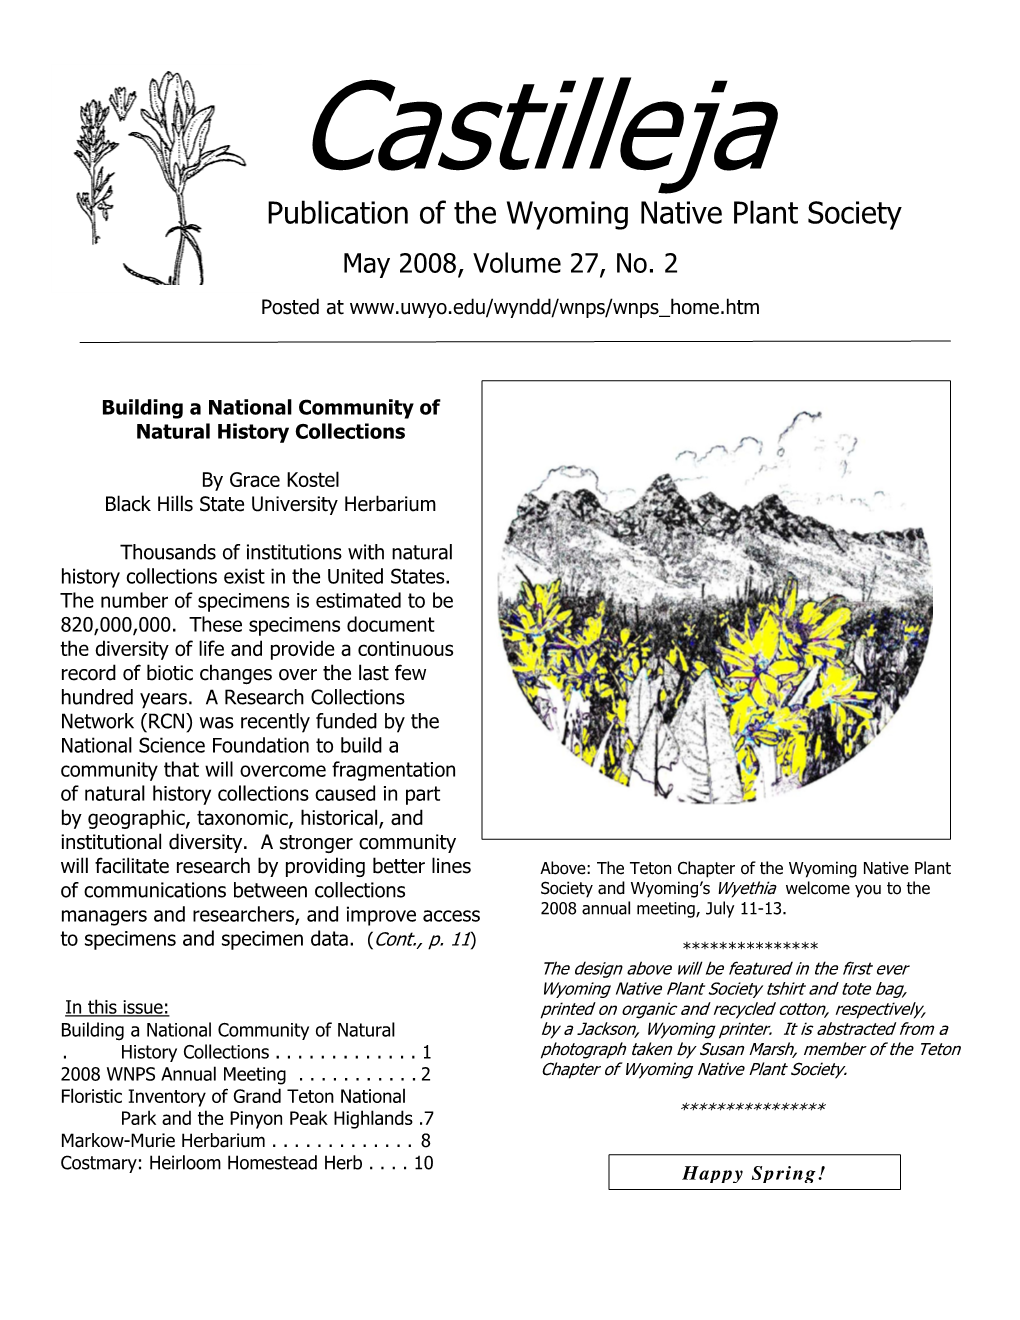 A Publication of the Wyoming Native Plant Society